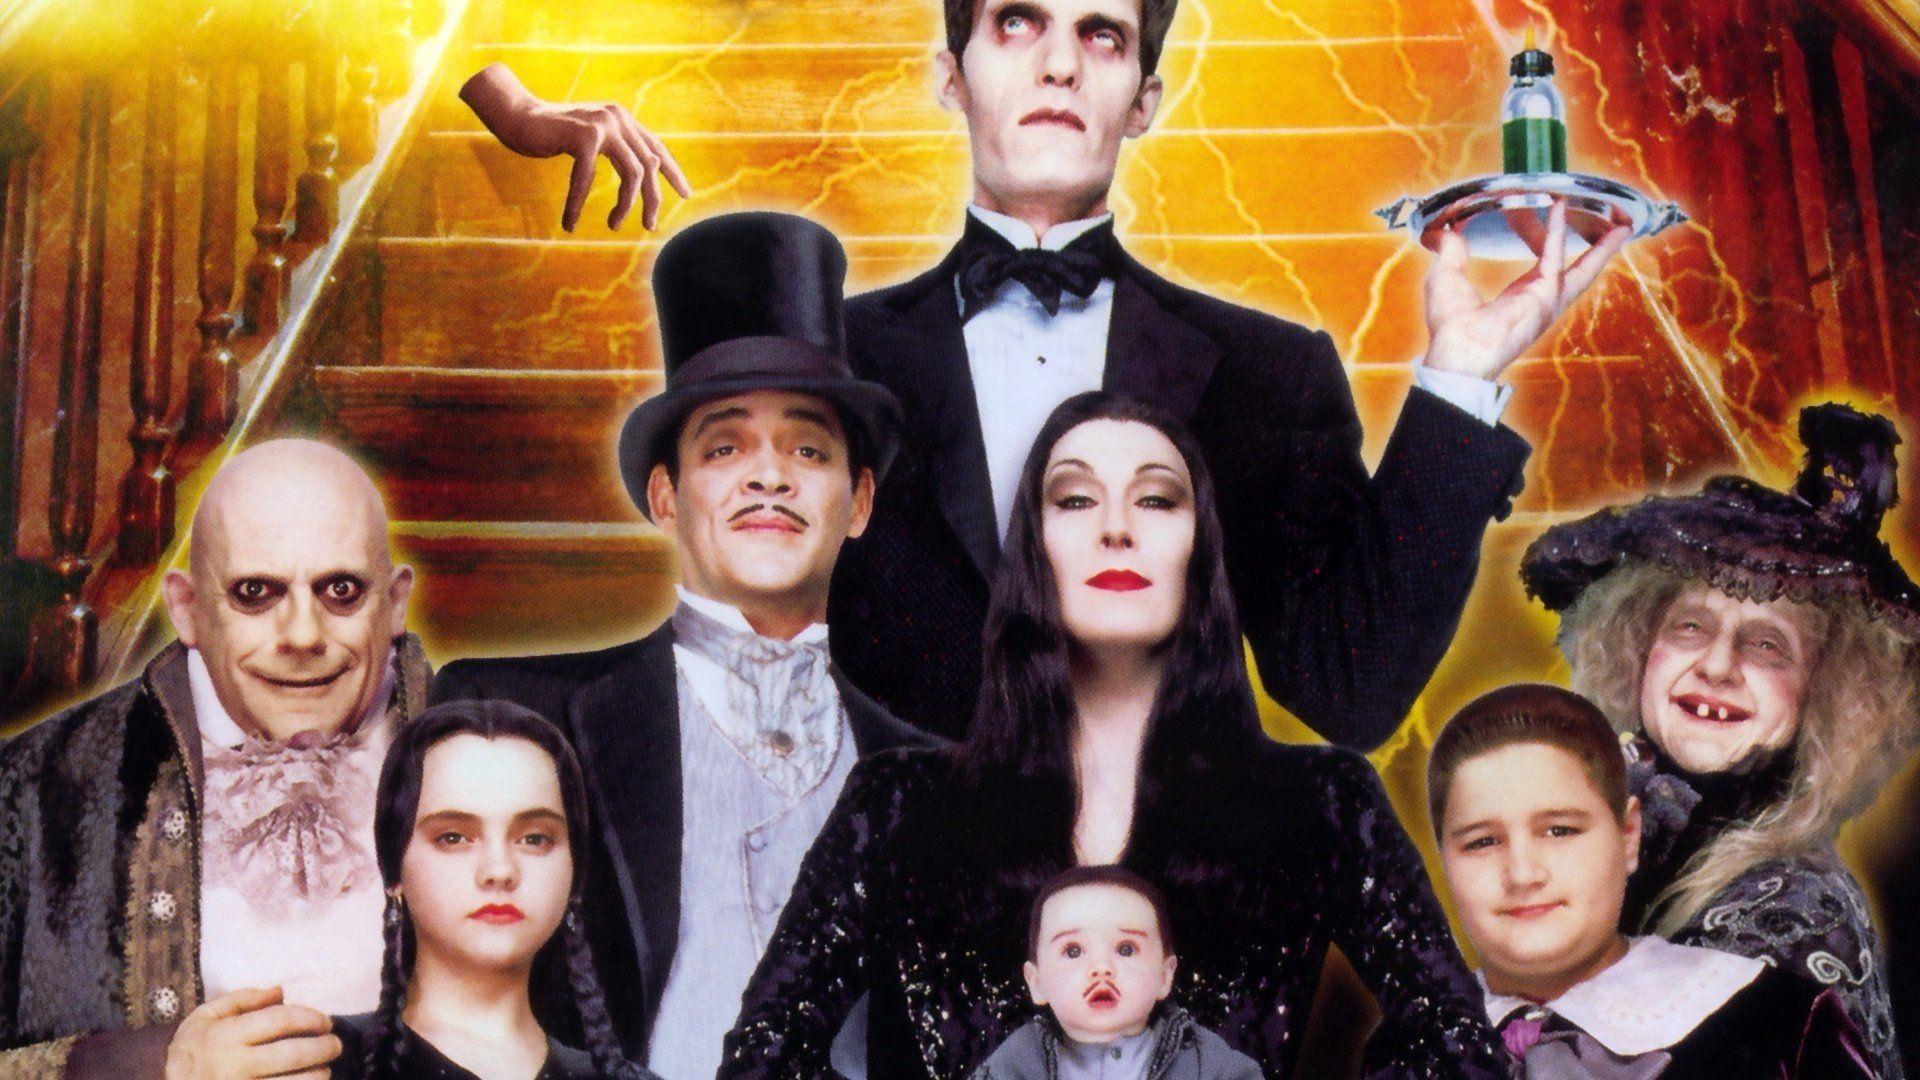 download watch addams family 2 1993